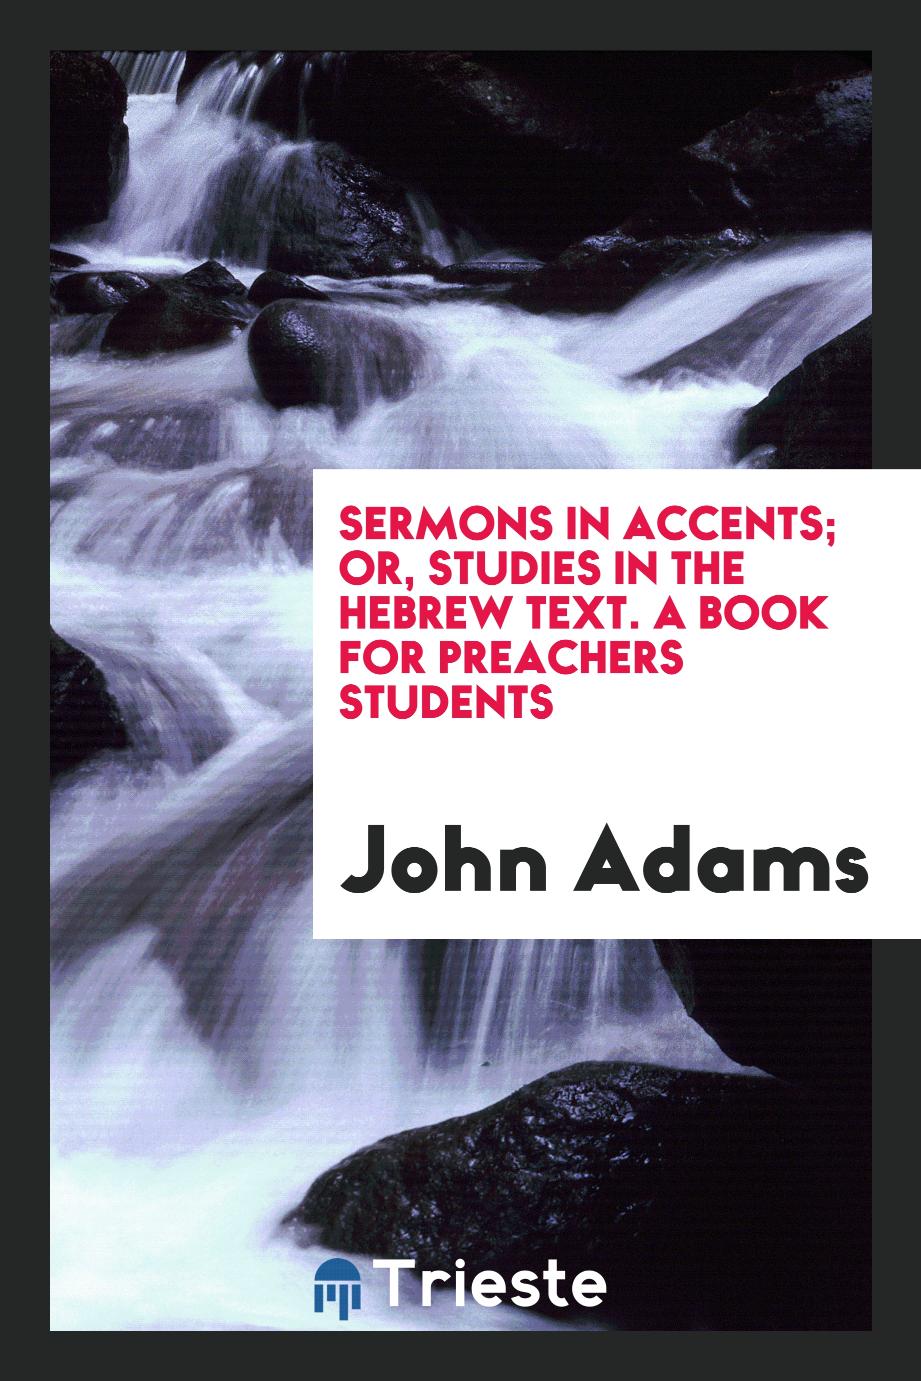 Sermons in accents; or, Studies in the Hebrew text. A book for preachers students